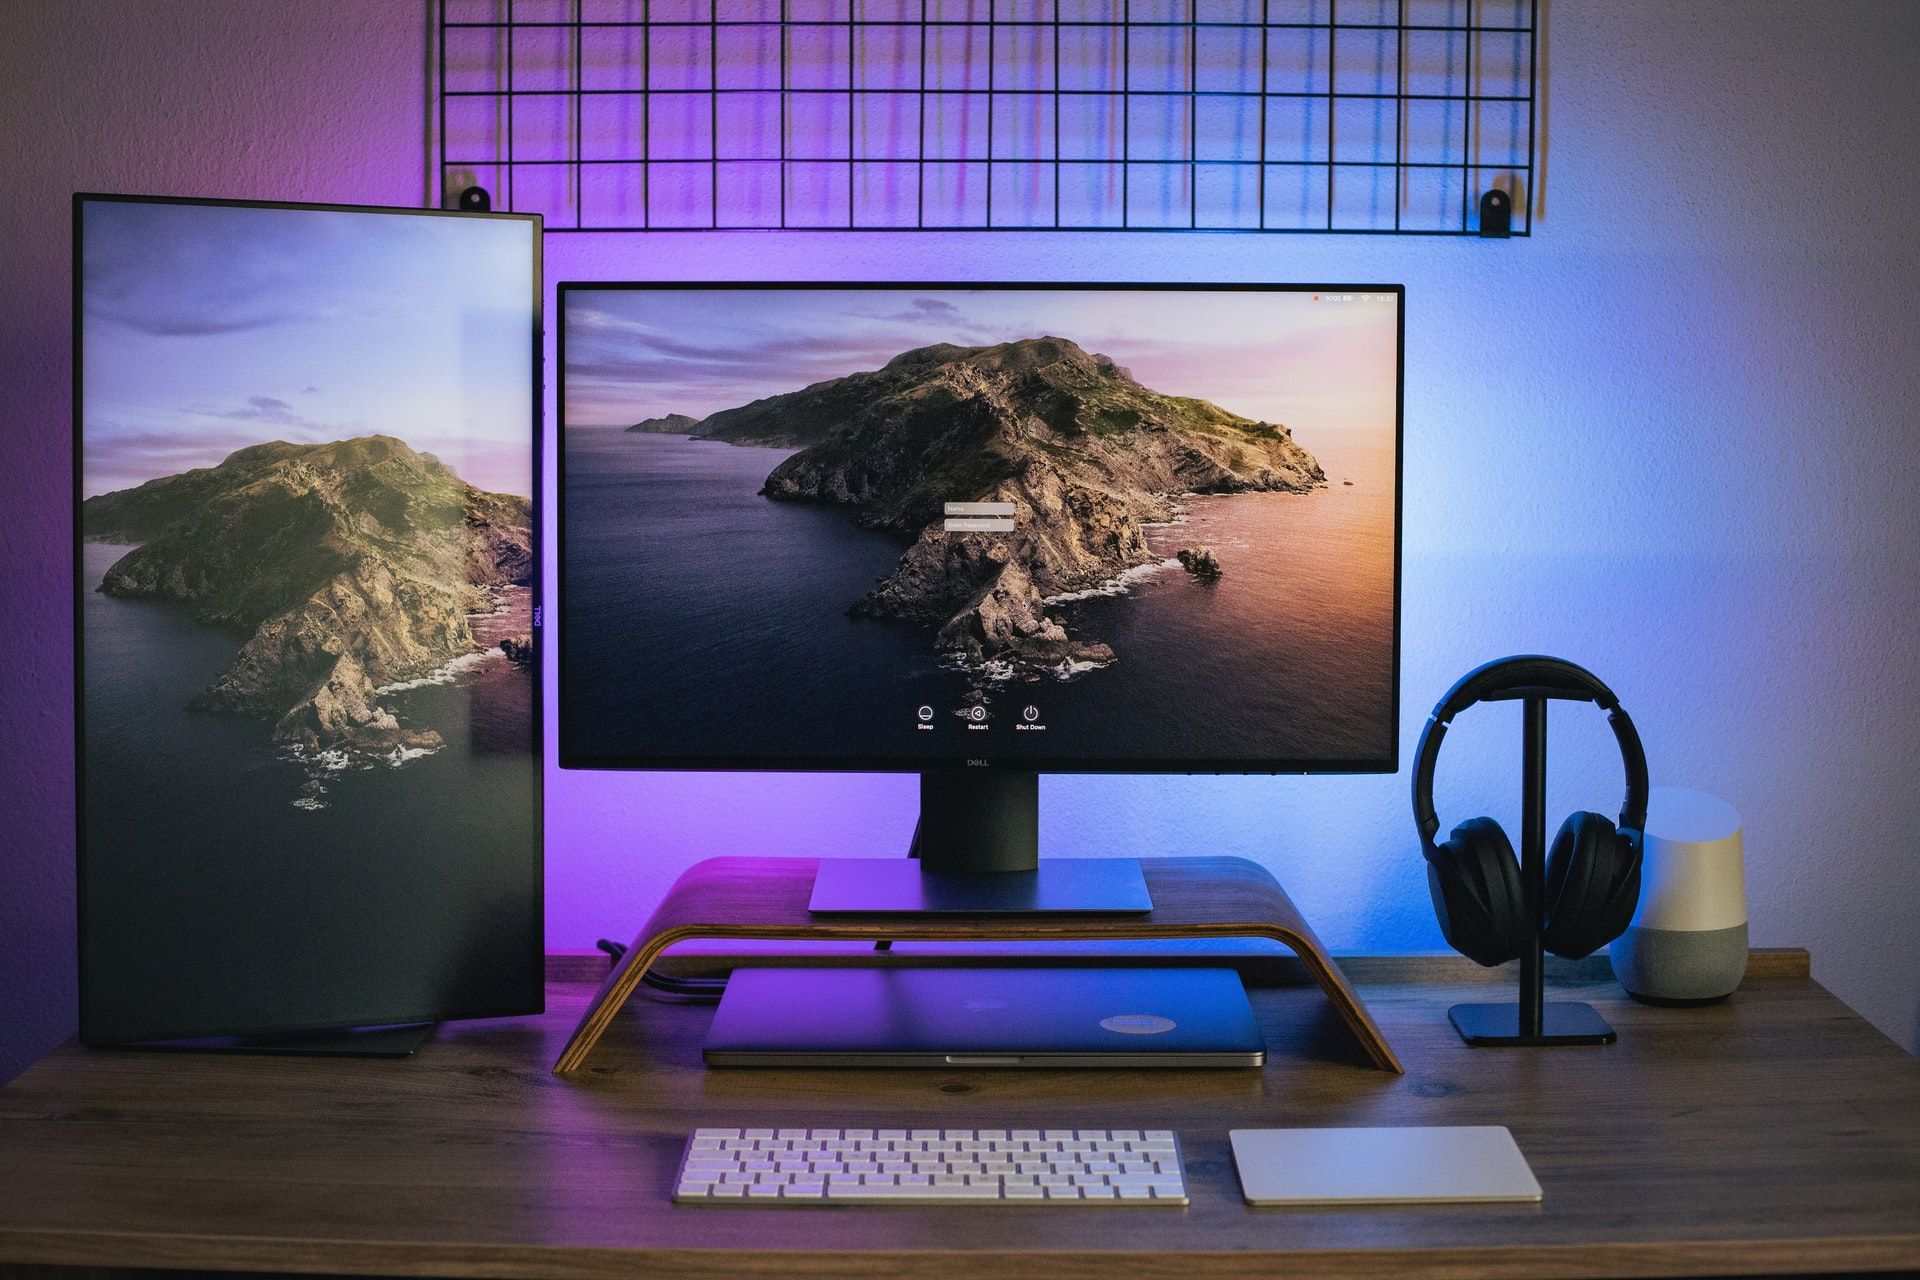 How to Set up & Use Dual Monitors on a Windows PC or Mac